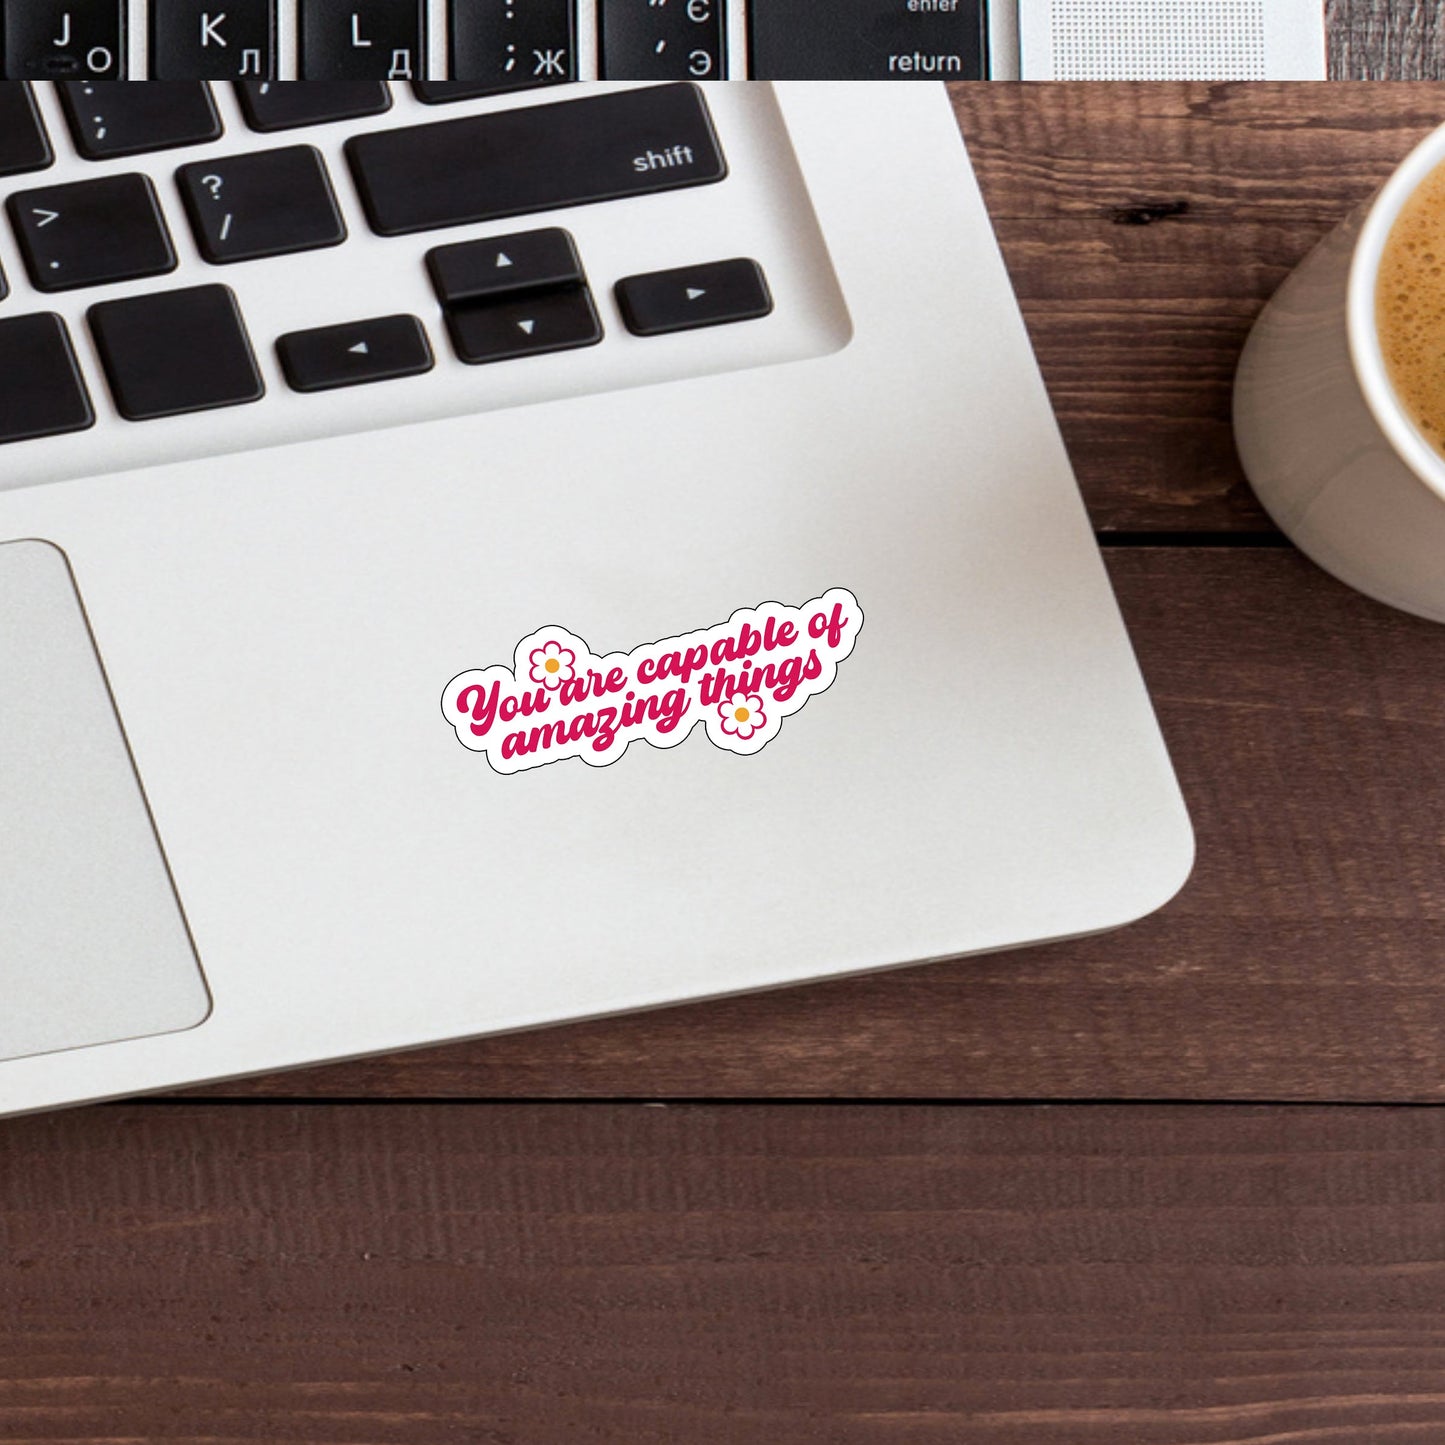 You are capable of amazing things  Sticker,  Vinyl sticker, laptop sticker, Tablet sticker